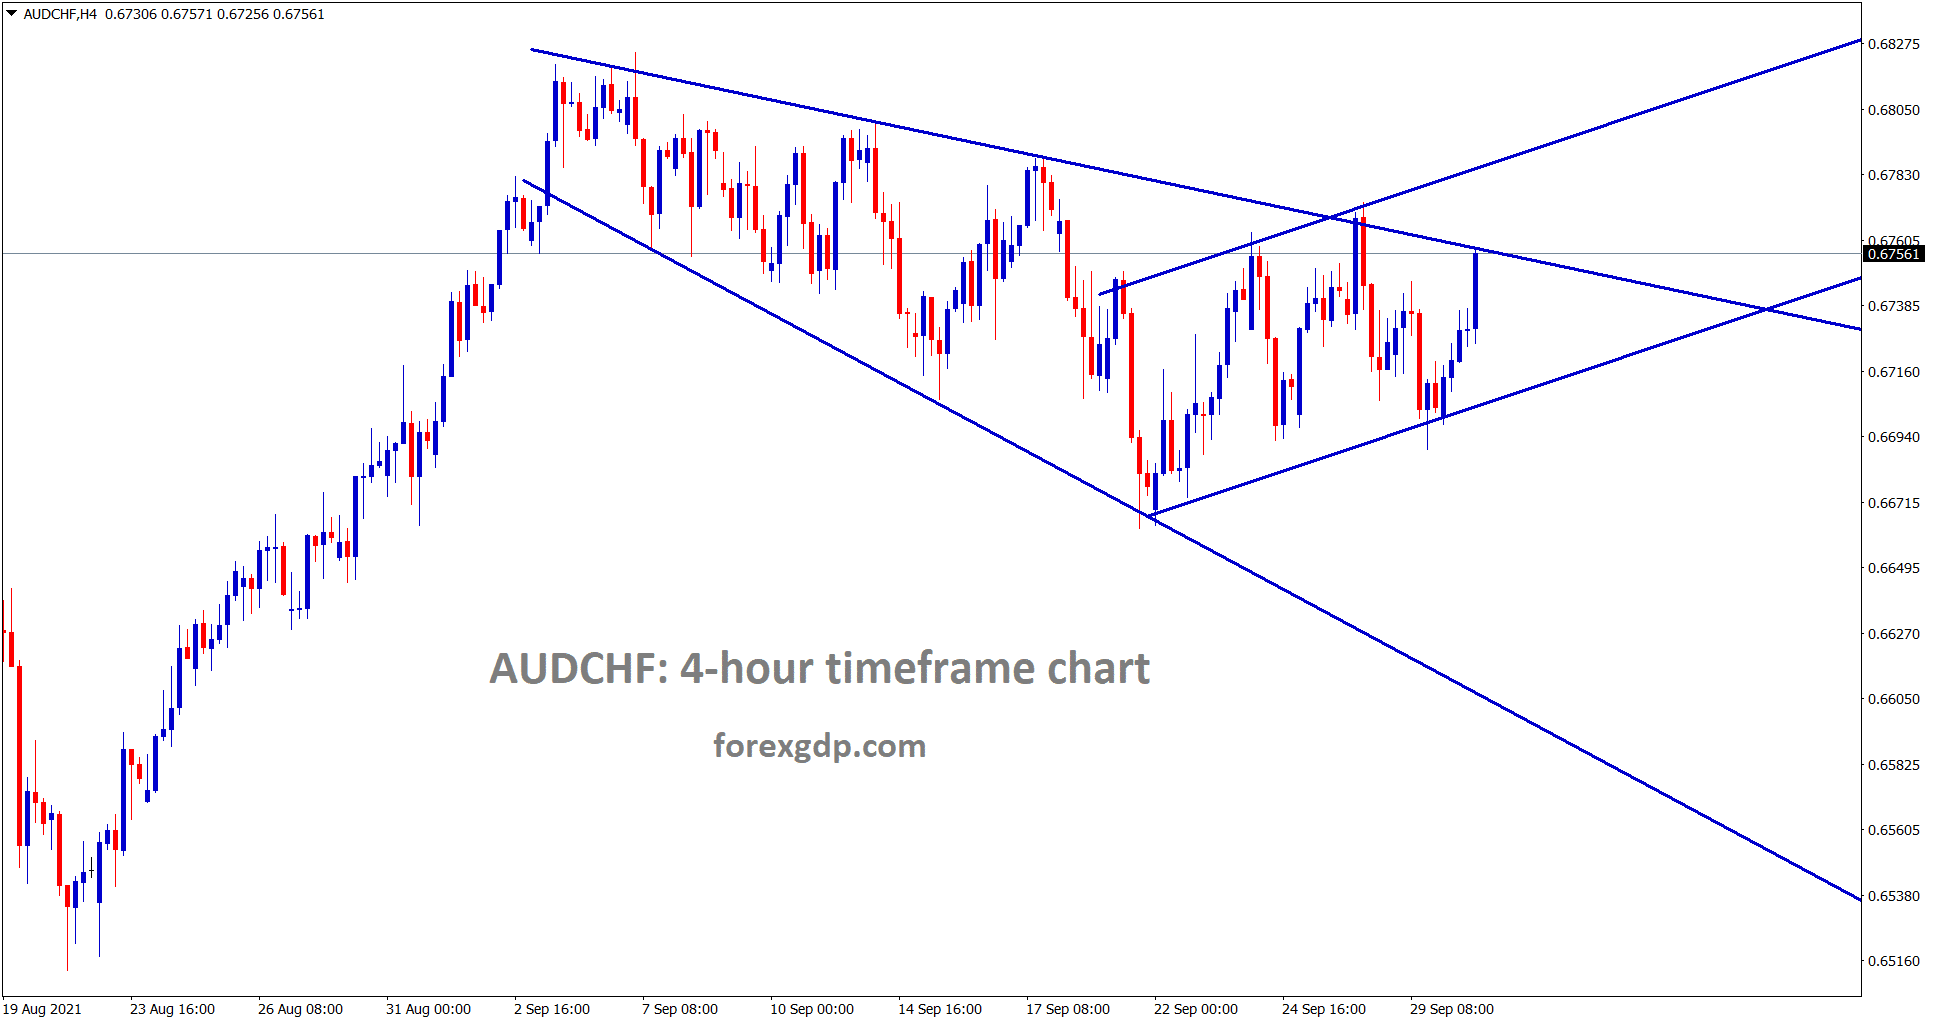 AUDCHF is still moving in a channel ranges wait for breakout